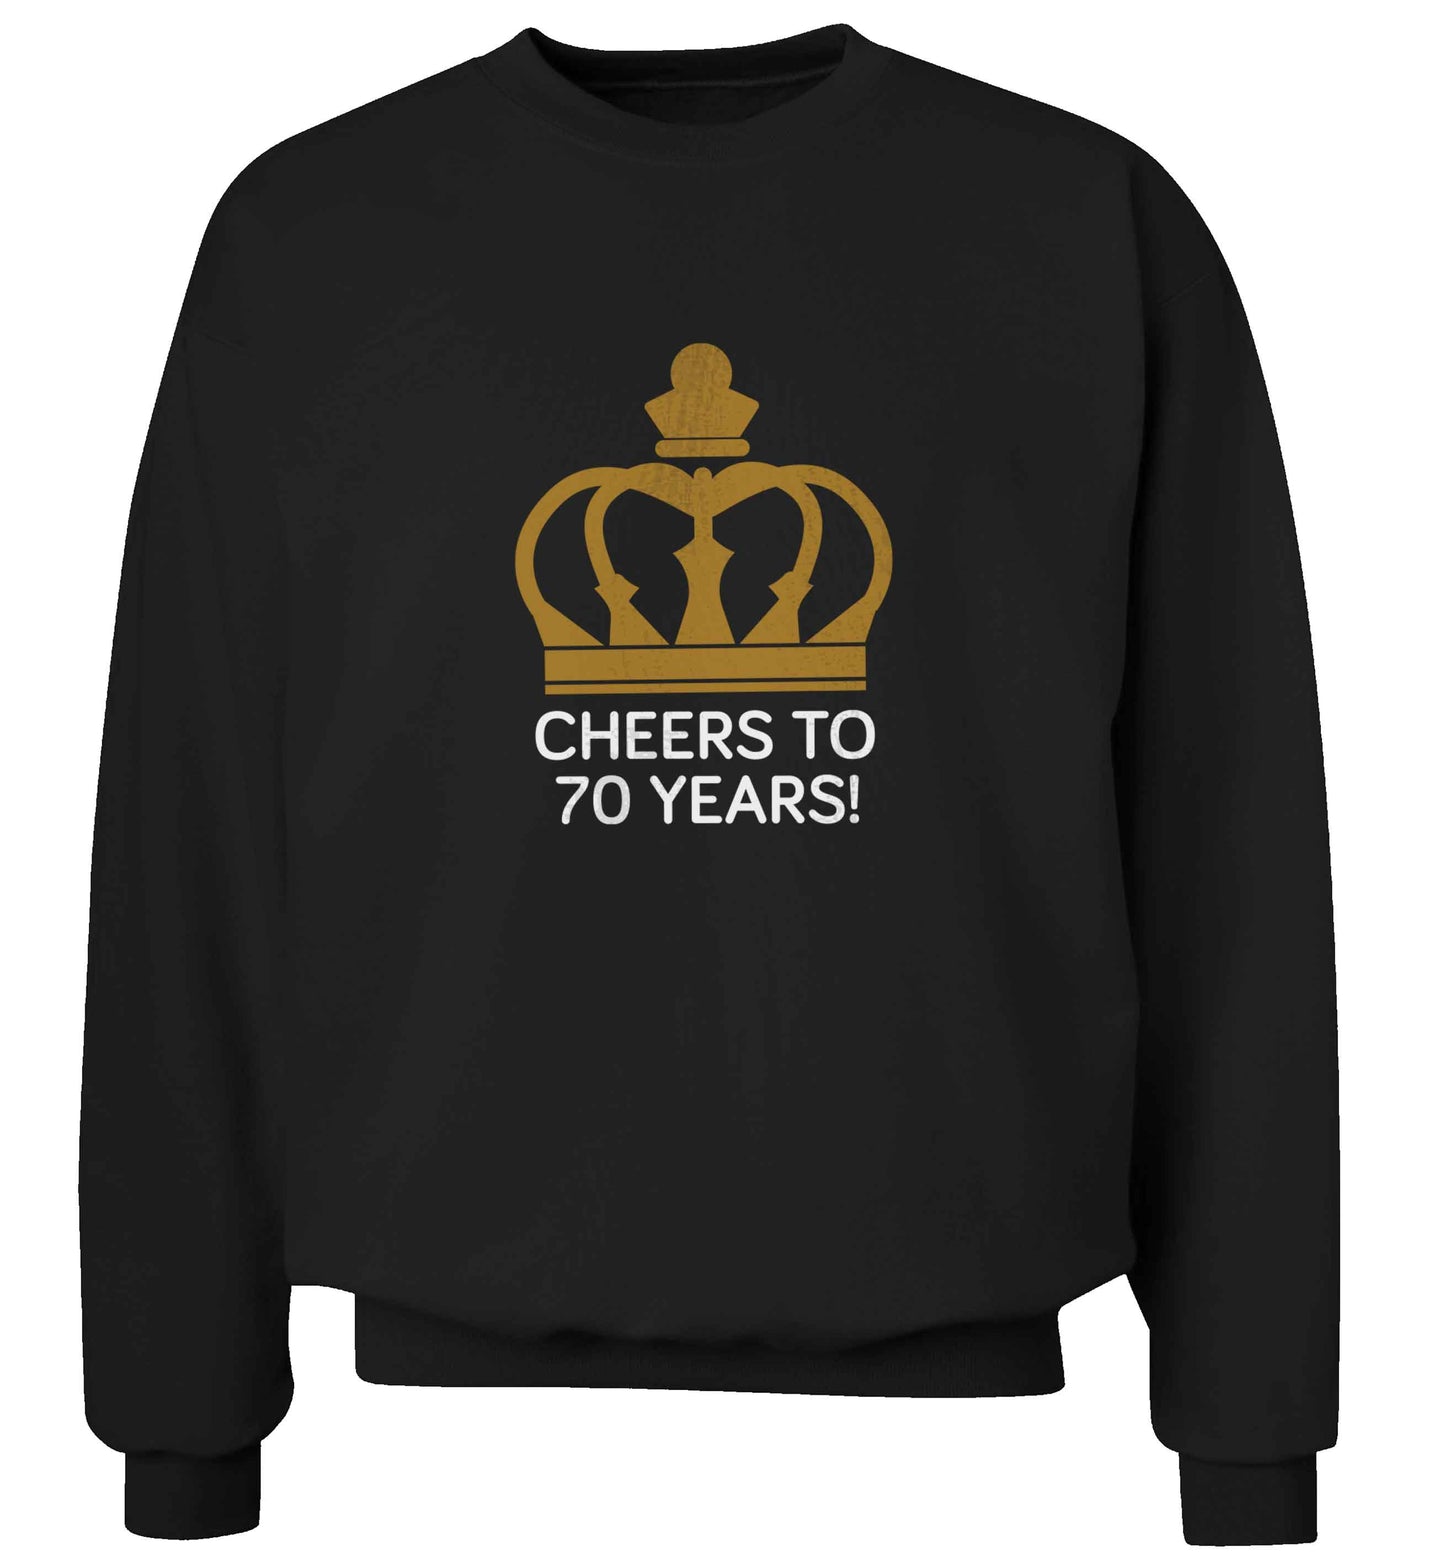 Cheers to 70 years! adult's unisex black sweater 2XL